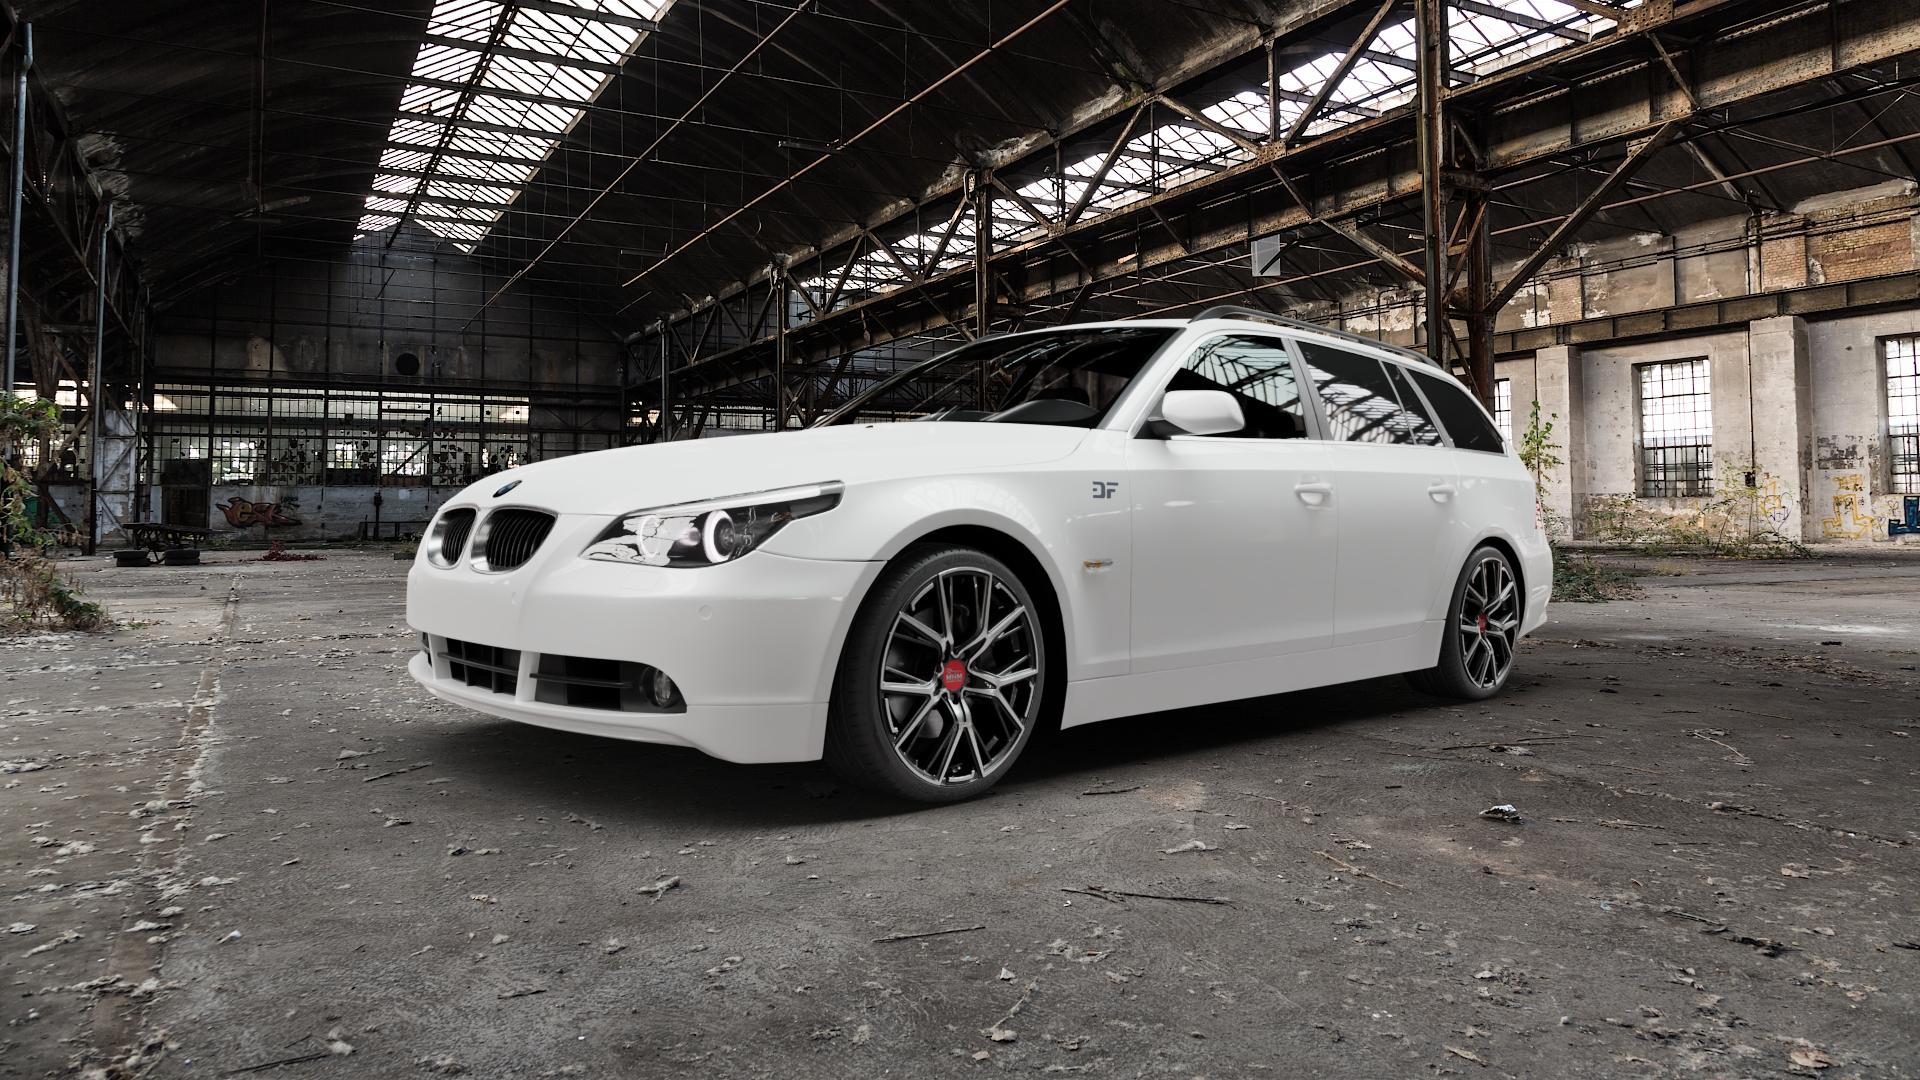 BMW 525xi Type E61 (Touring) 3,0l 160kW (218 hp) Wheels and Tyre Packages